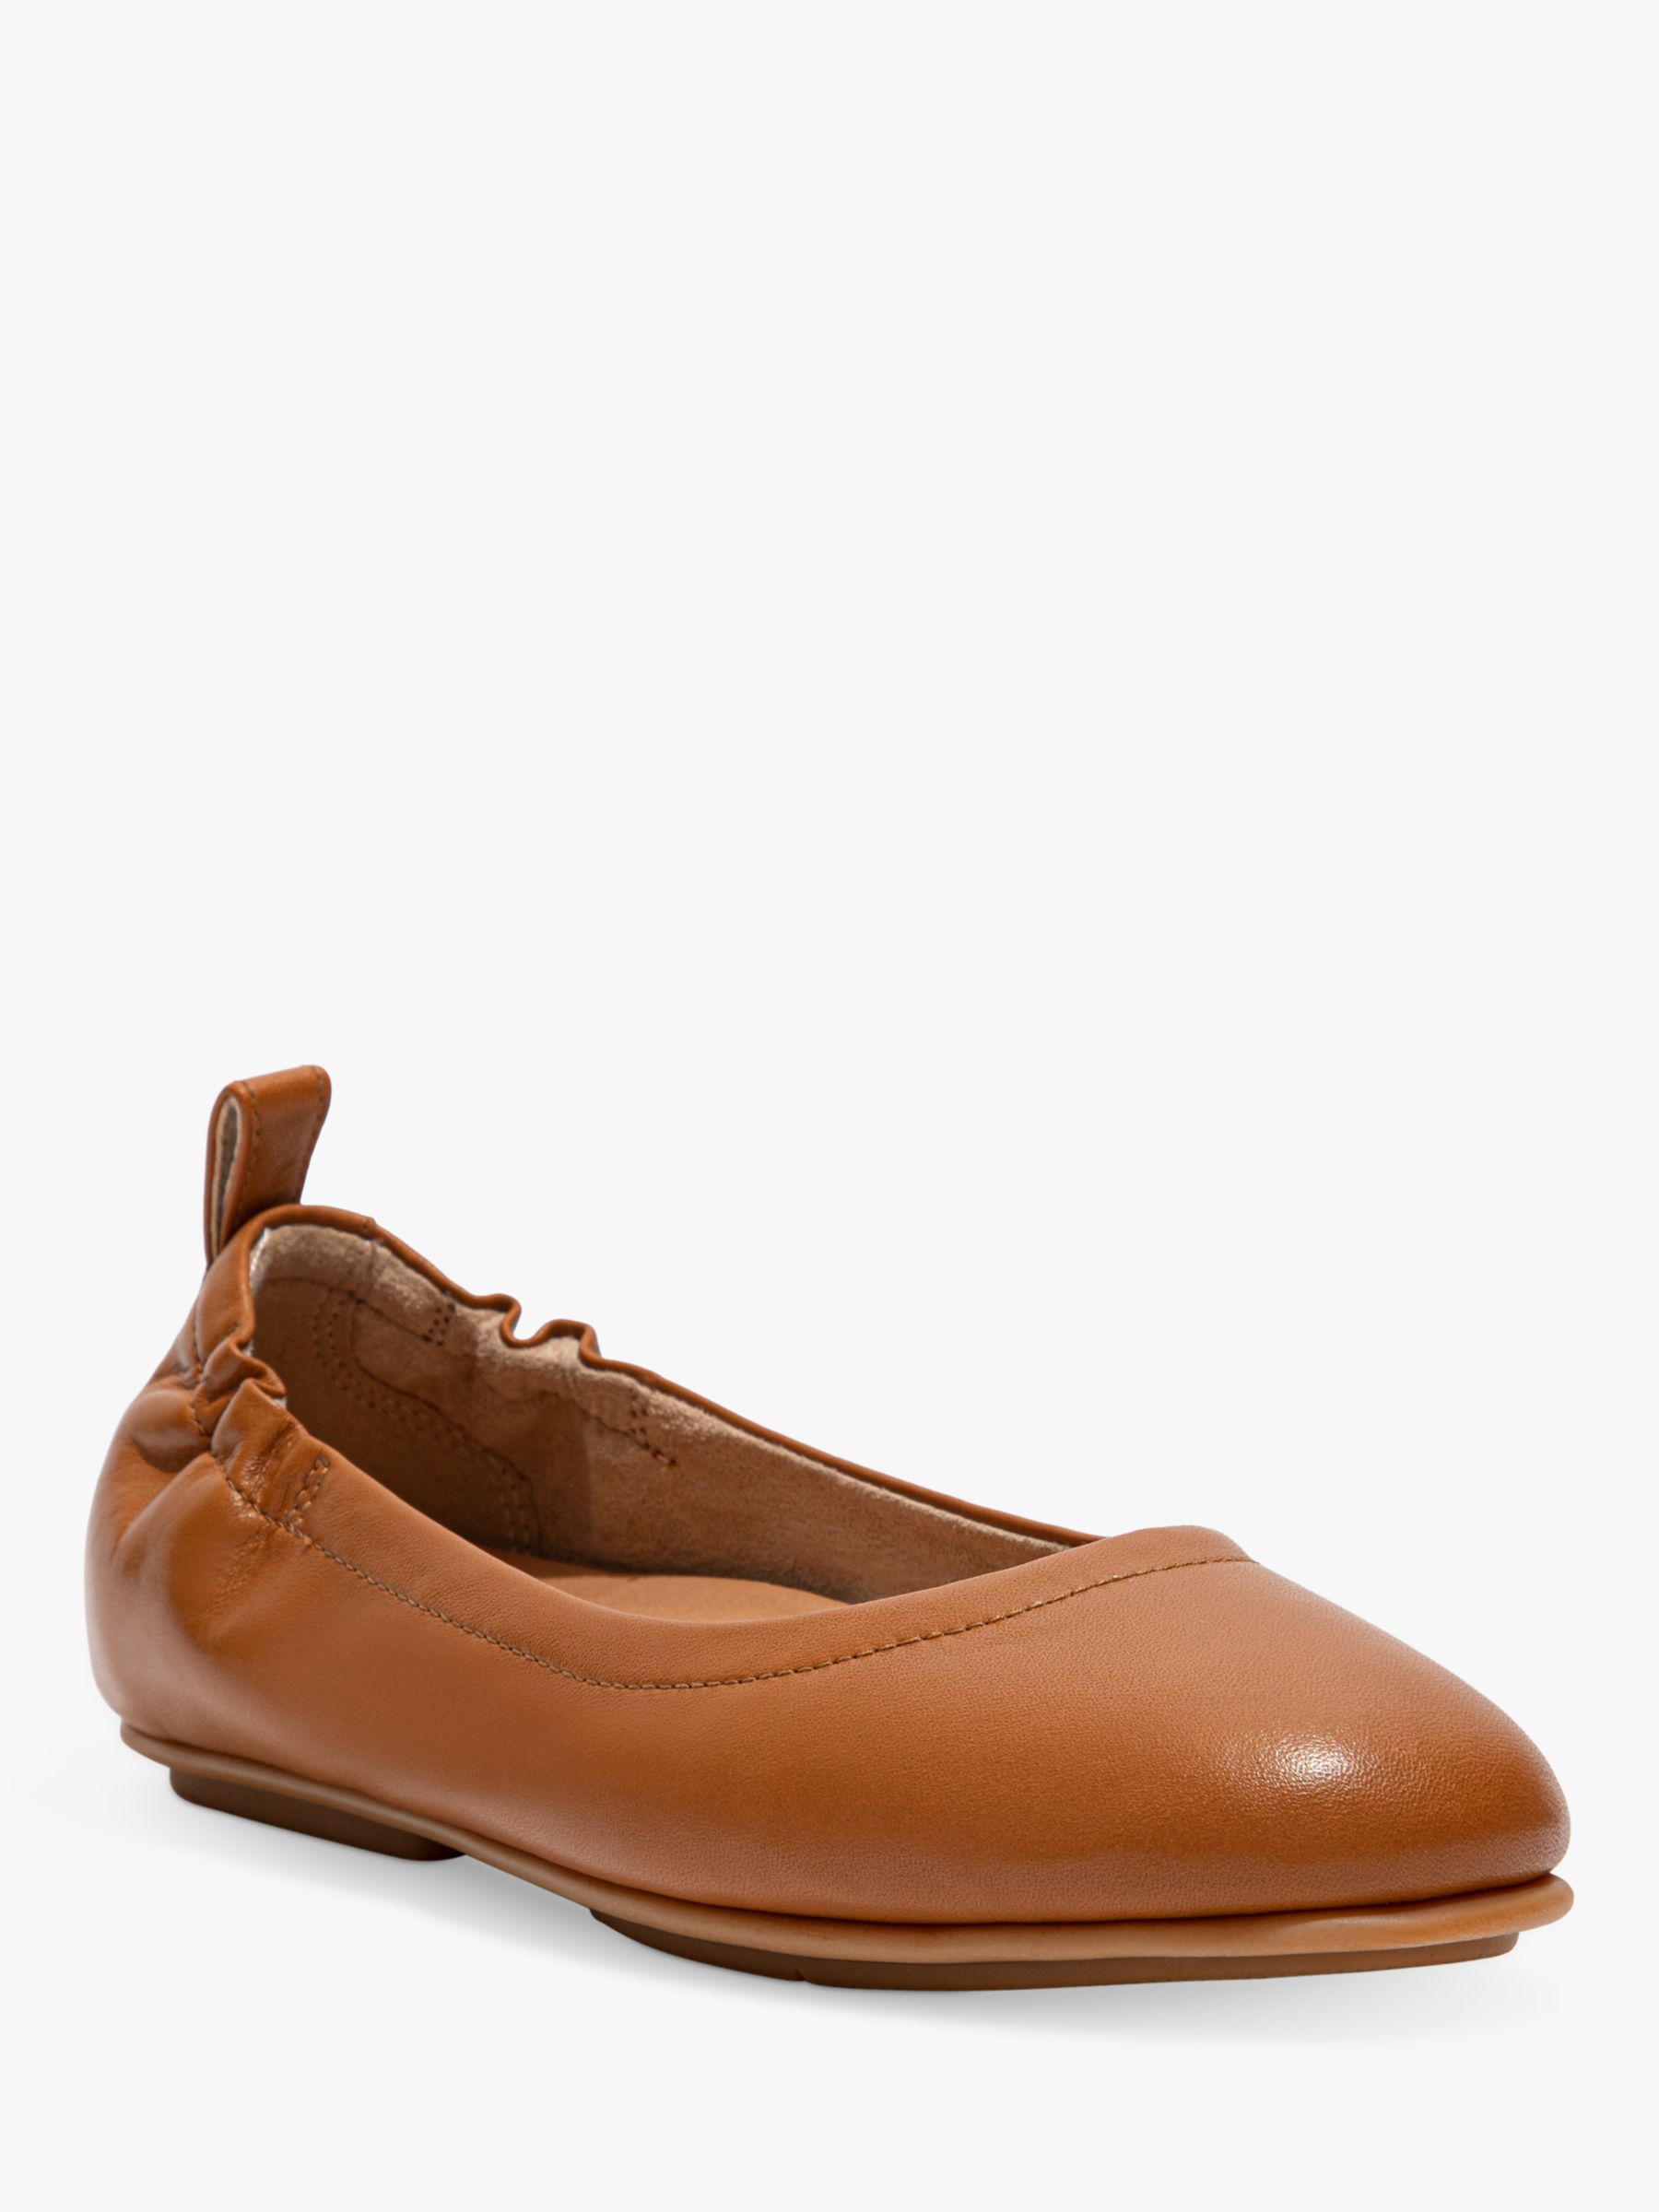 FitFlop Allegro Soft Leather Ballet Pumps, Light Tan at John Lewis ...